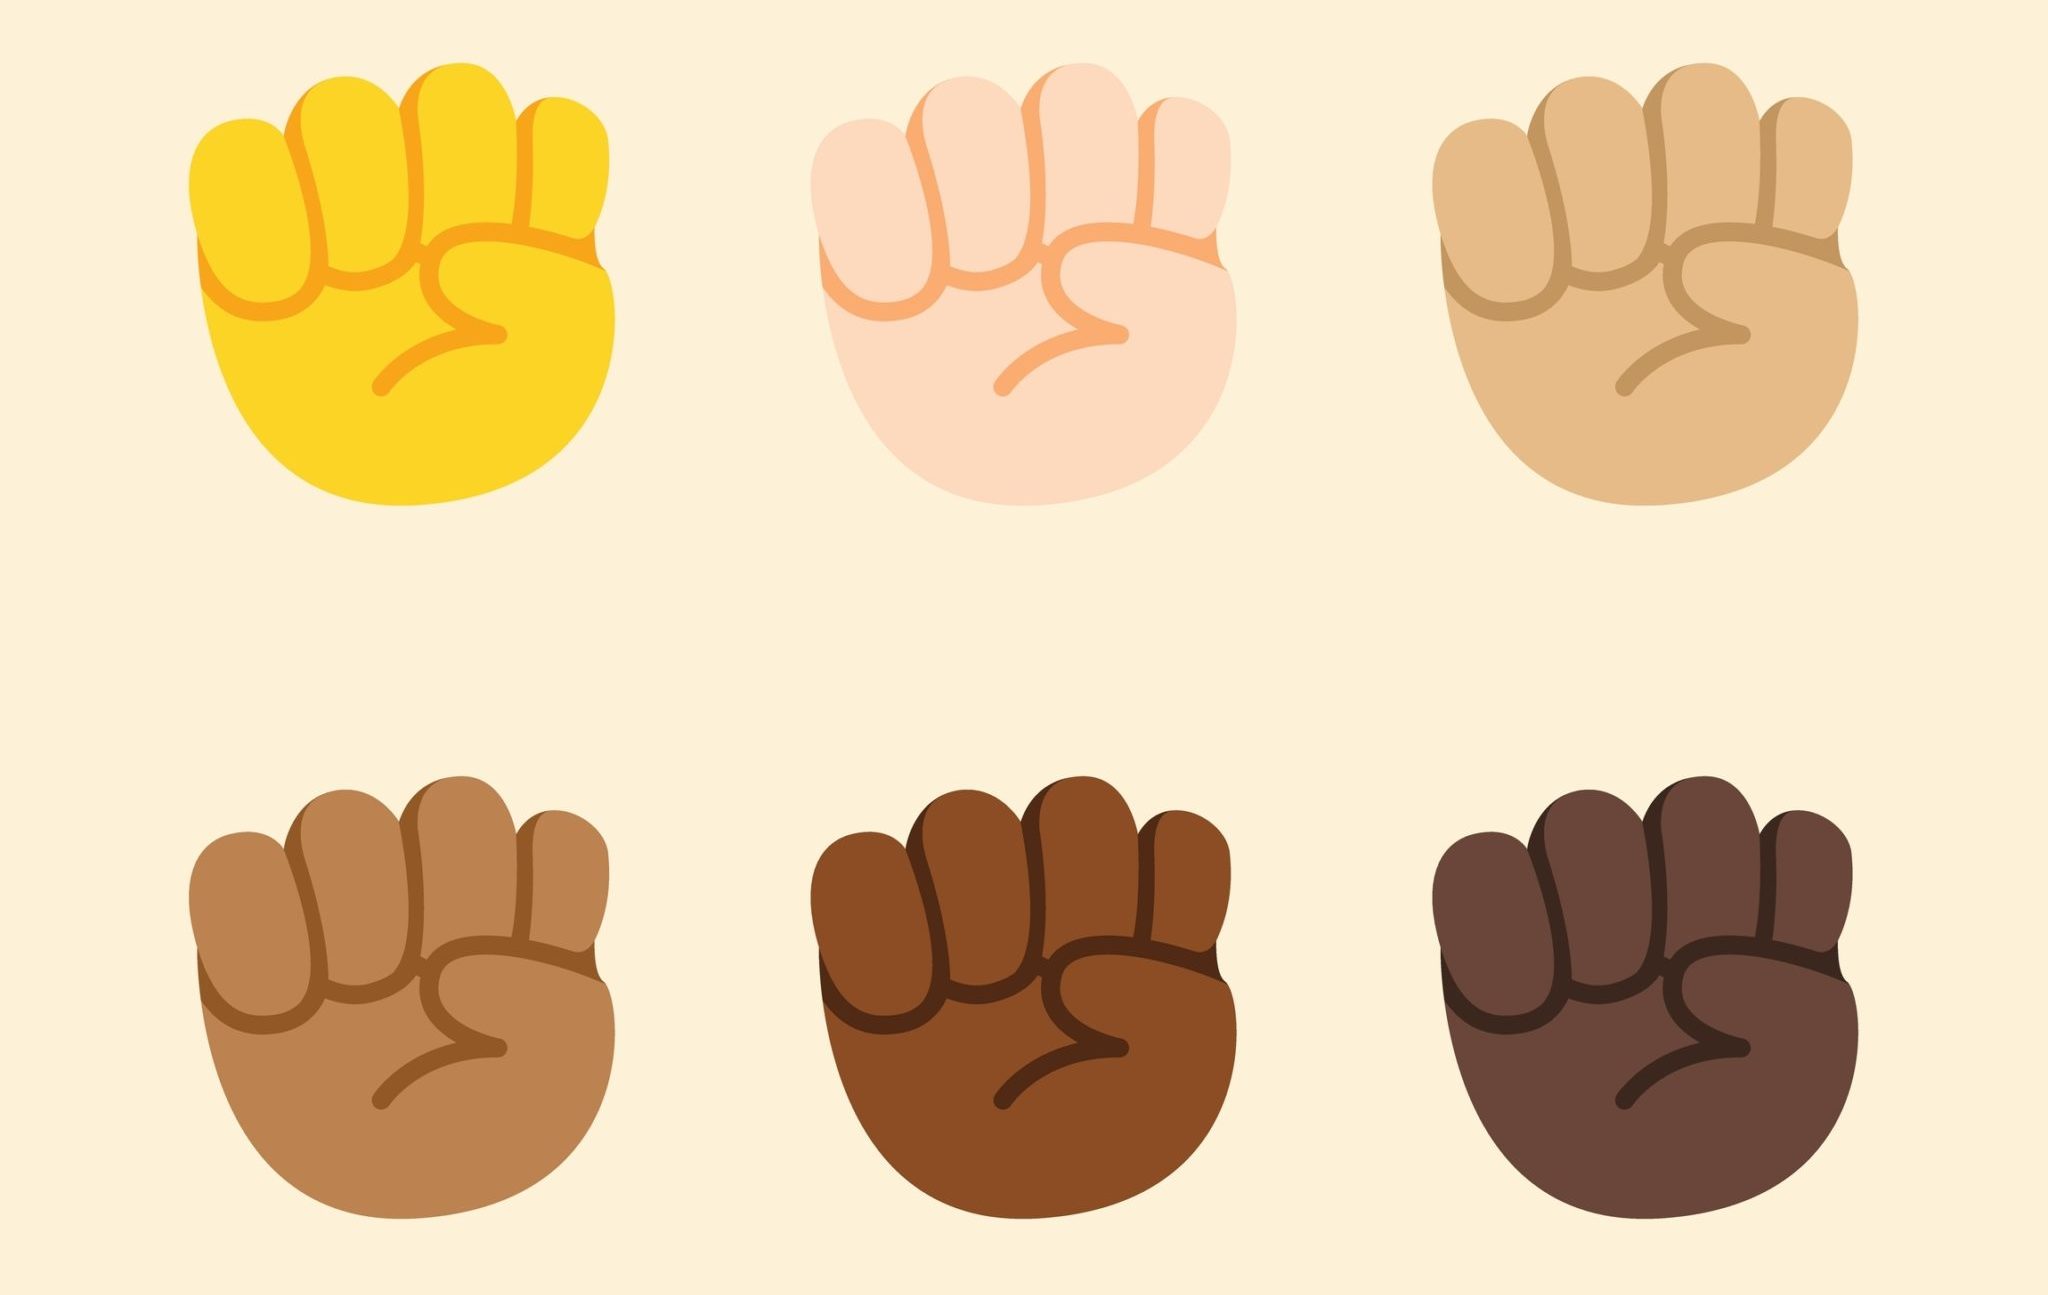 Are Your Emojis Racist? - The American Conservative